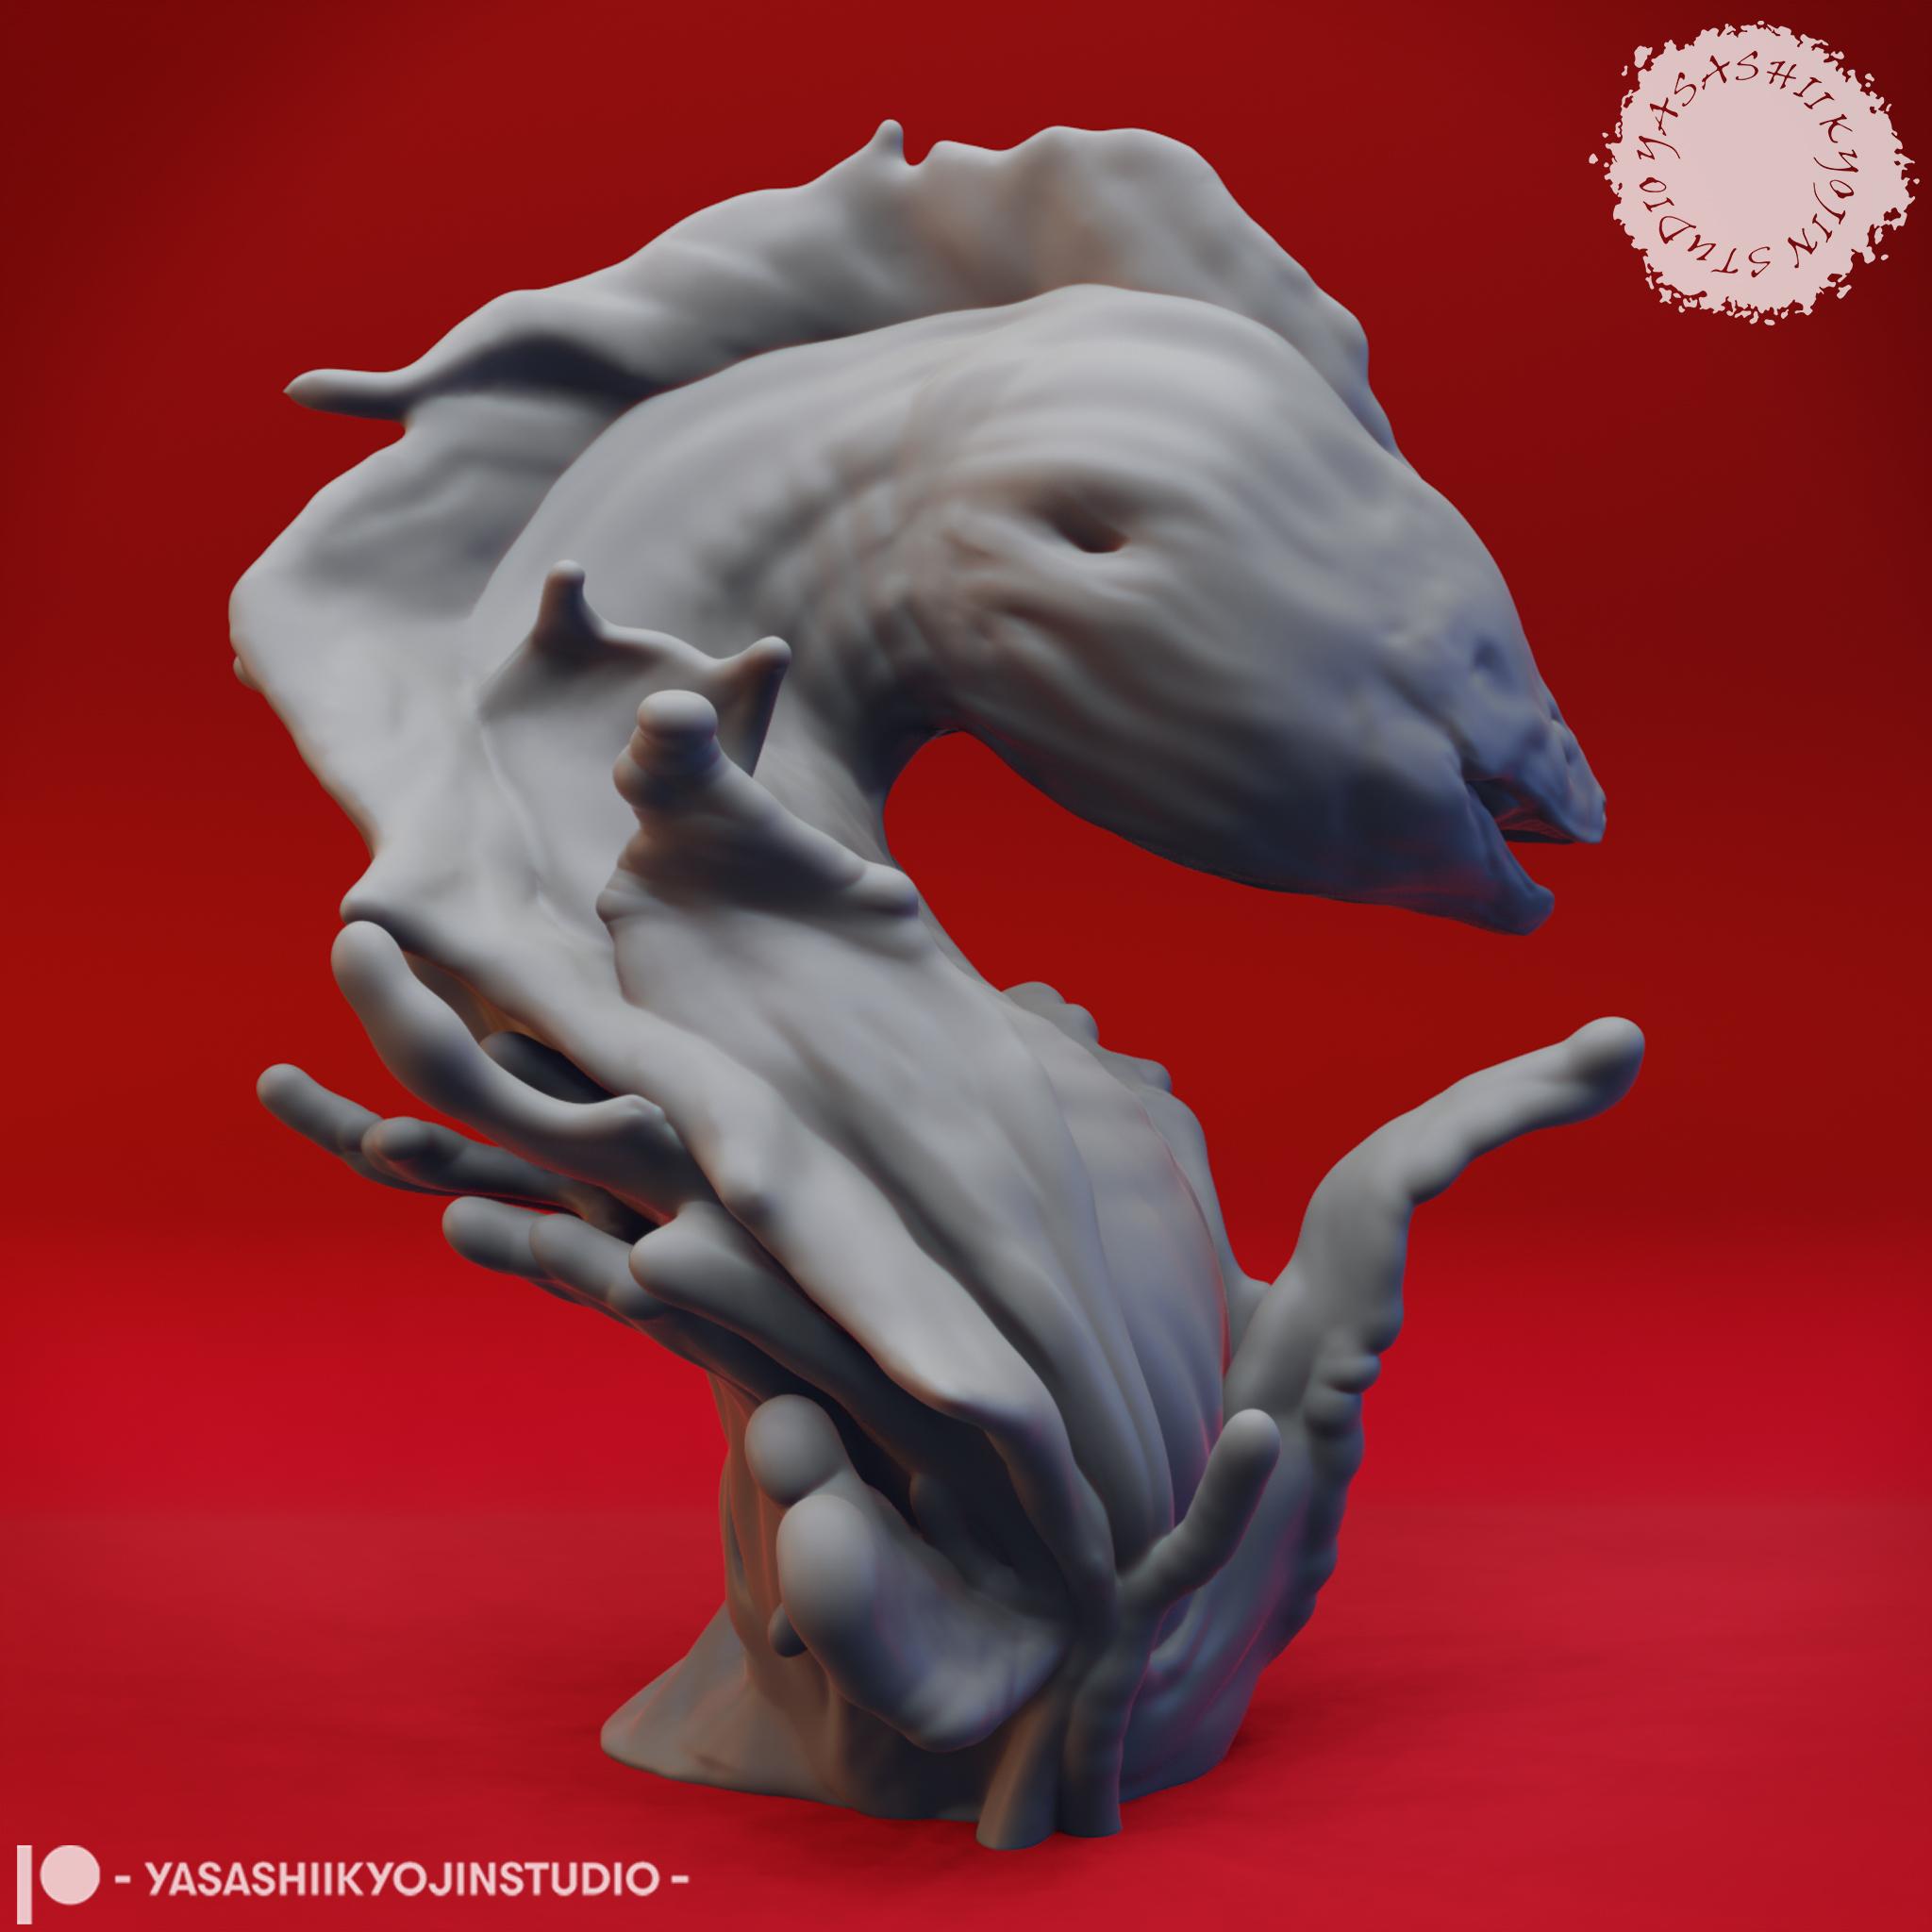 Water Elemental - Tabletop Miniature (Pre-Supported) 3d model